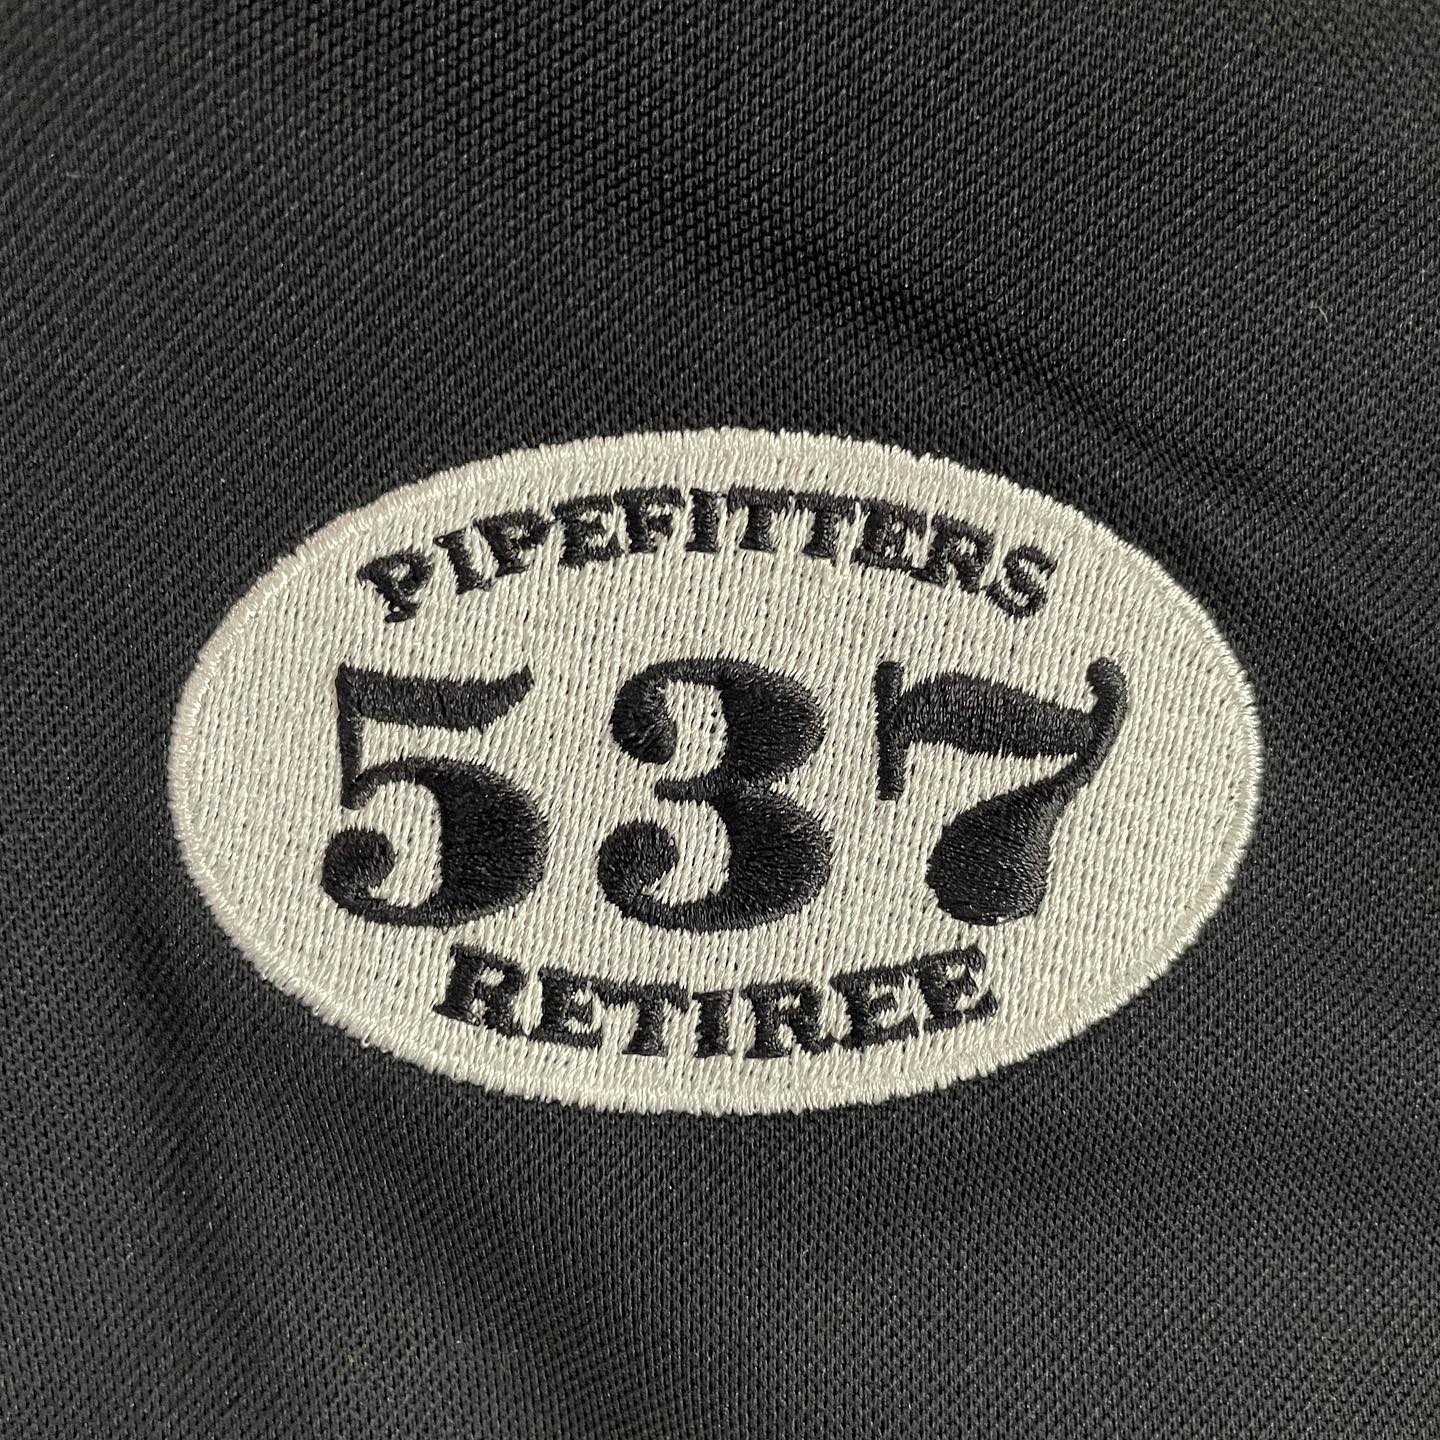 From current Pipefitters 537 members to retirees, we’ve got them covered! Here’s a sneak peak at some new polos coming soon.